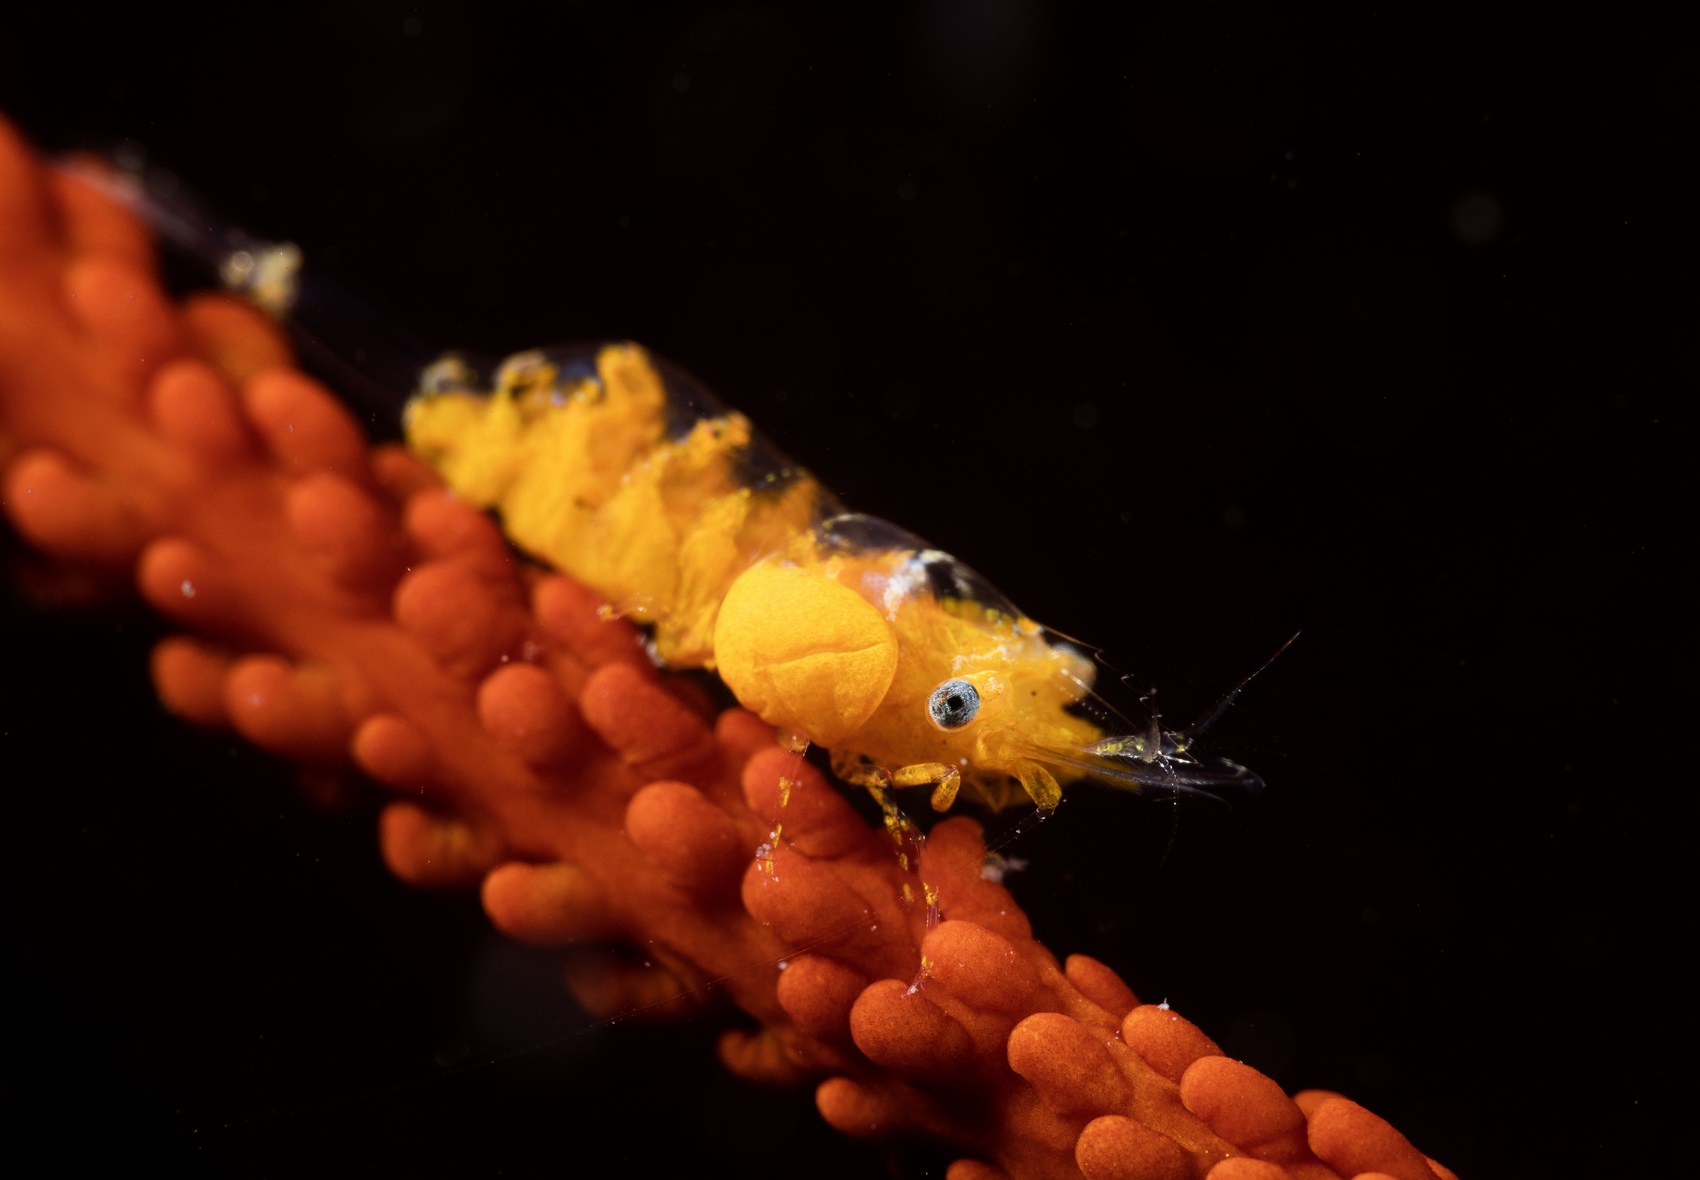 "Parasite", special prize for junior underwater photographer of the Macro & Close-up Category in the Open Group Digital Photo Competition at Hong Kong Underwater Photo and Video Competition 2023, taken by Qobe Tsang off Basalt Island. Photo: GovHK.